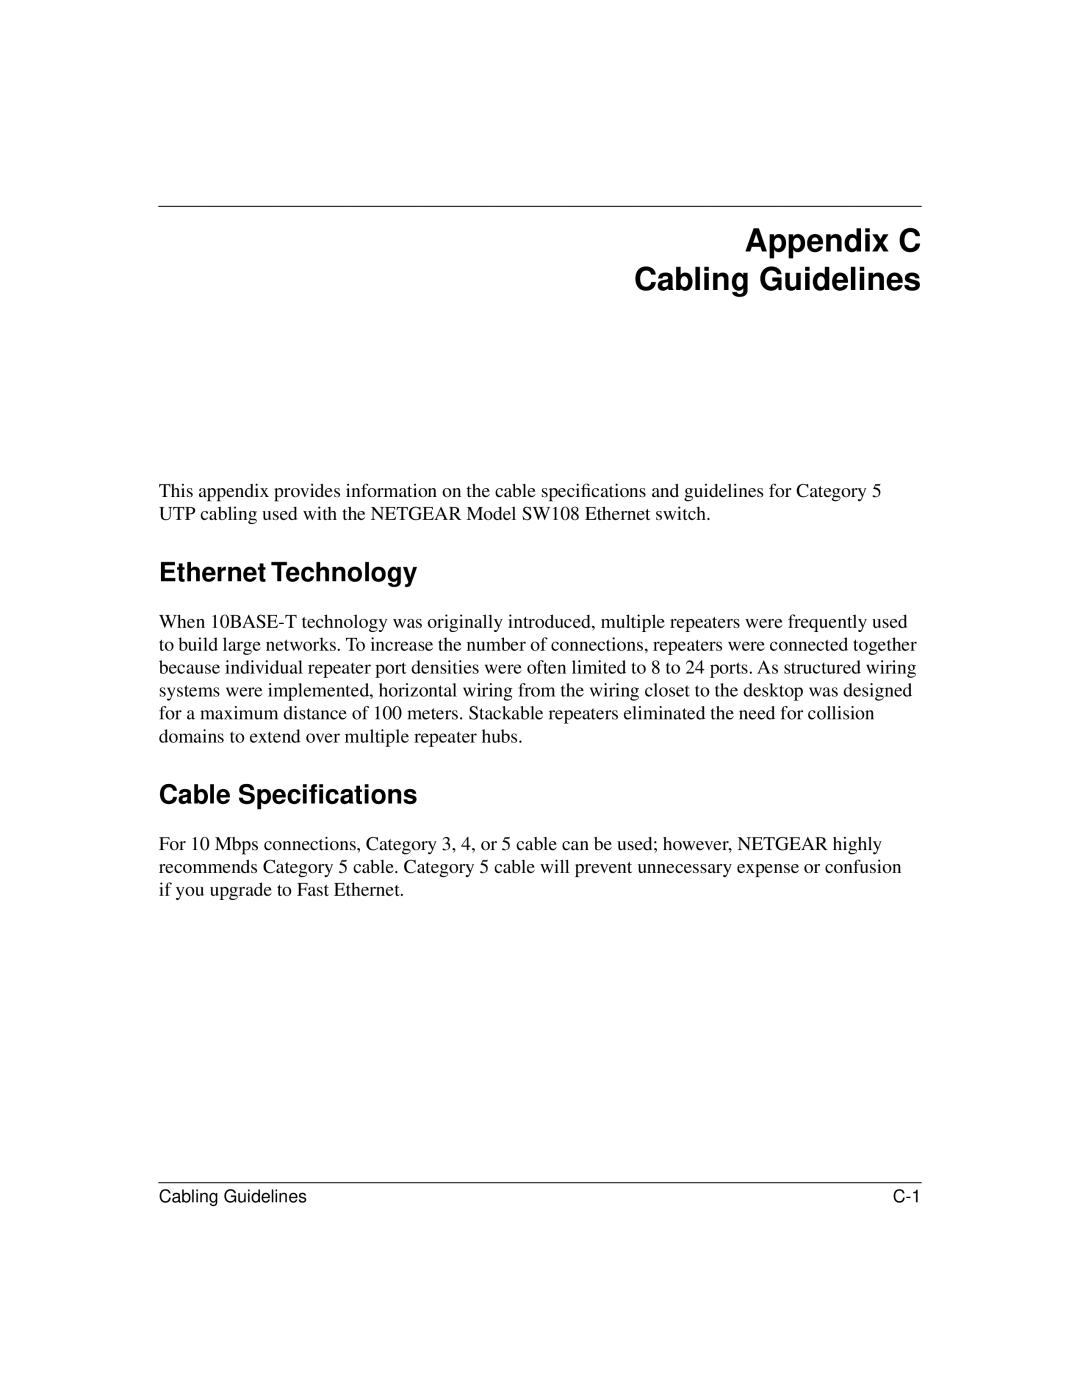 NETGEAR SW108 manual Appendix C Cabling Guidelines, Ethernet Technology, Cable Speciﬁcations 